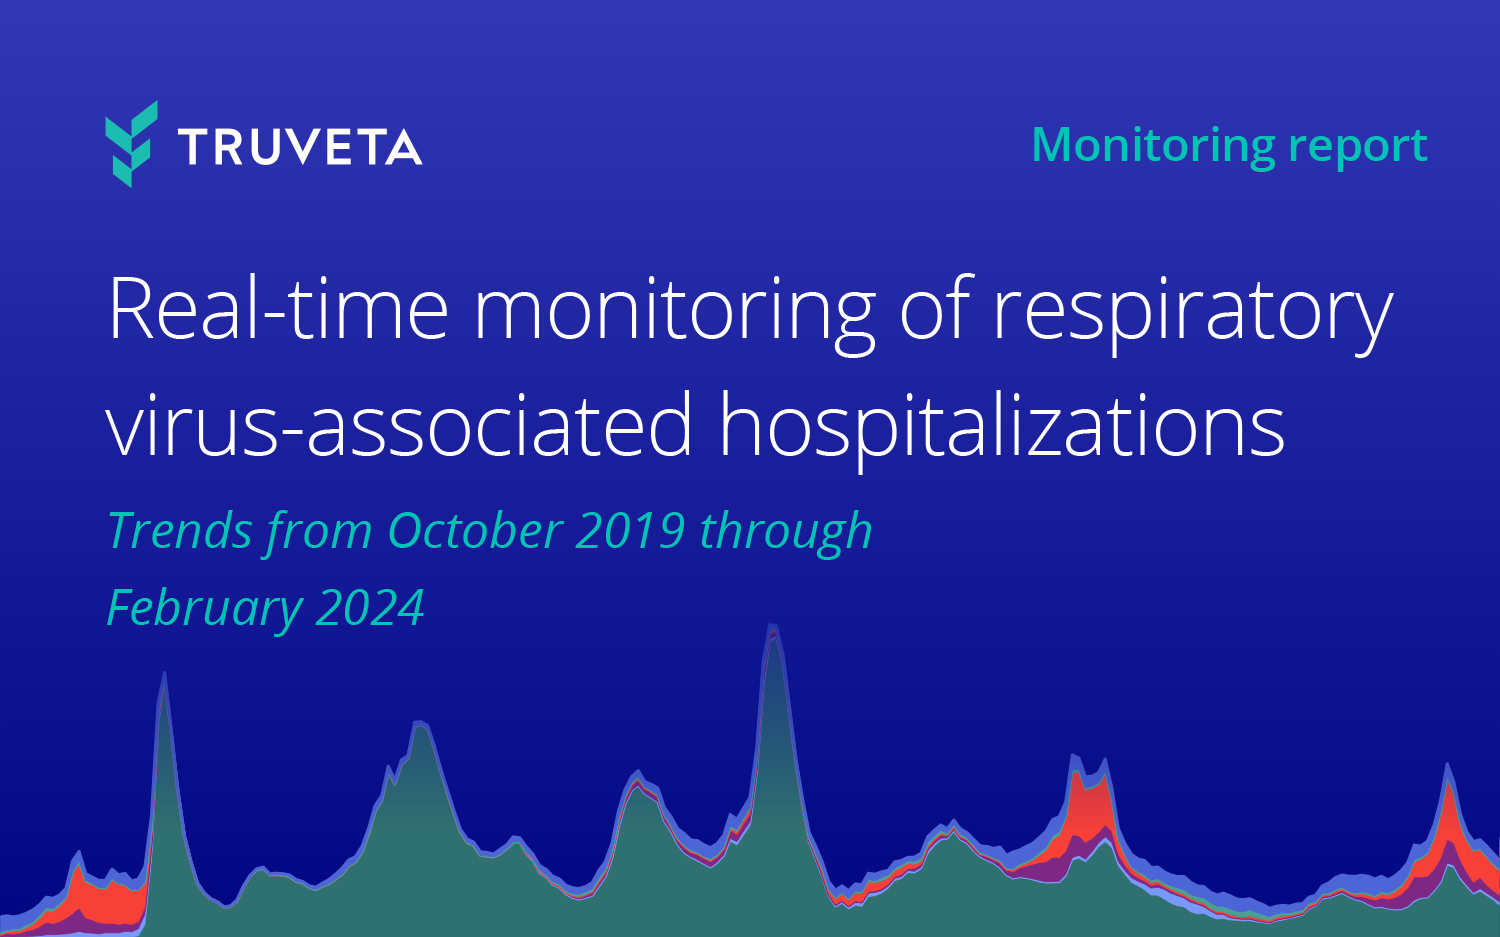 Real-time trends in respiratory virus-associated hospitalizations, including COVID, RSV, and influenza